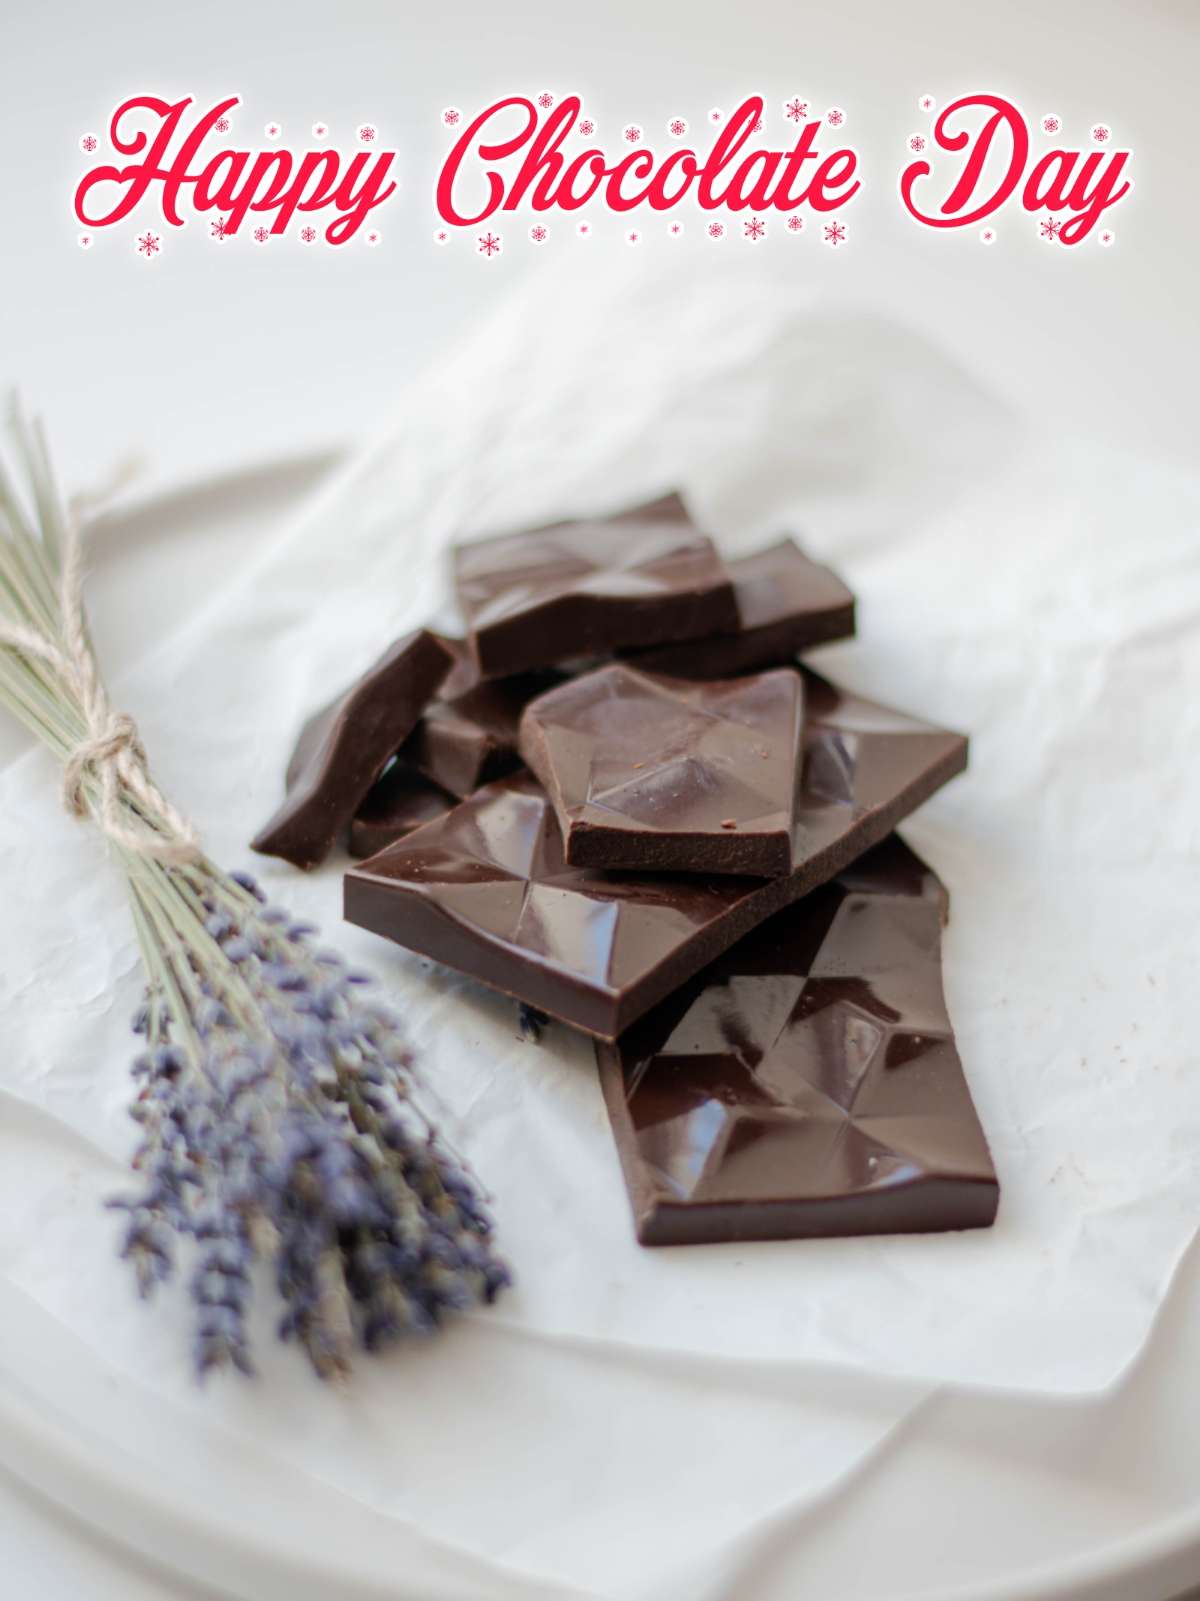 Chocolate Day Images For Husband Download